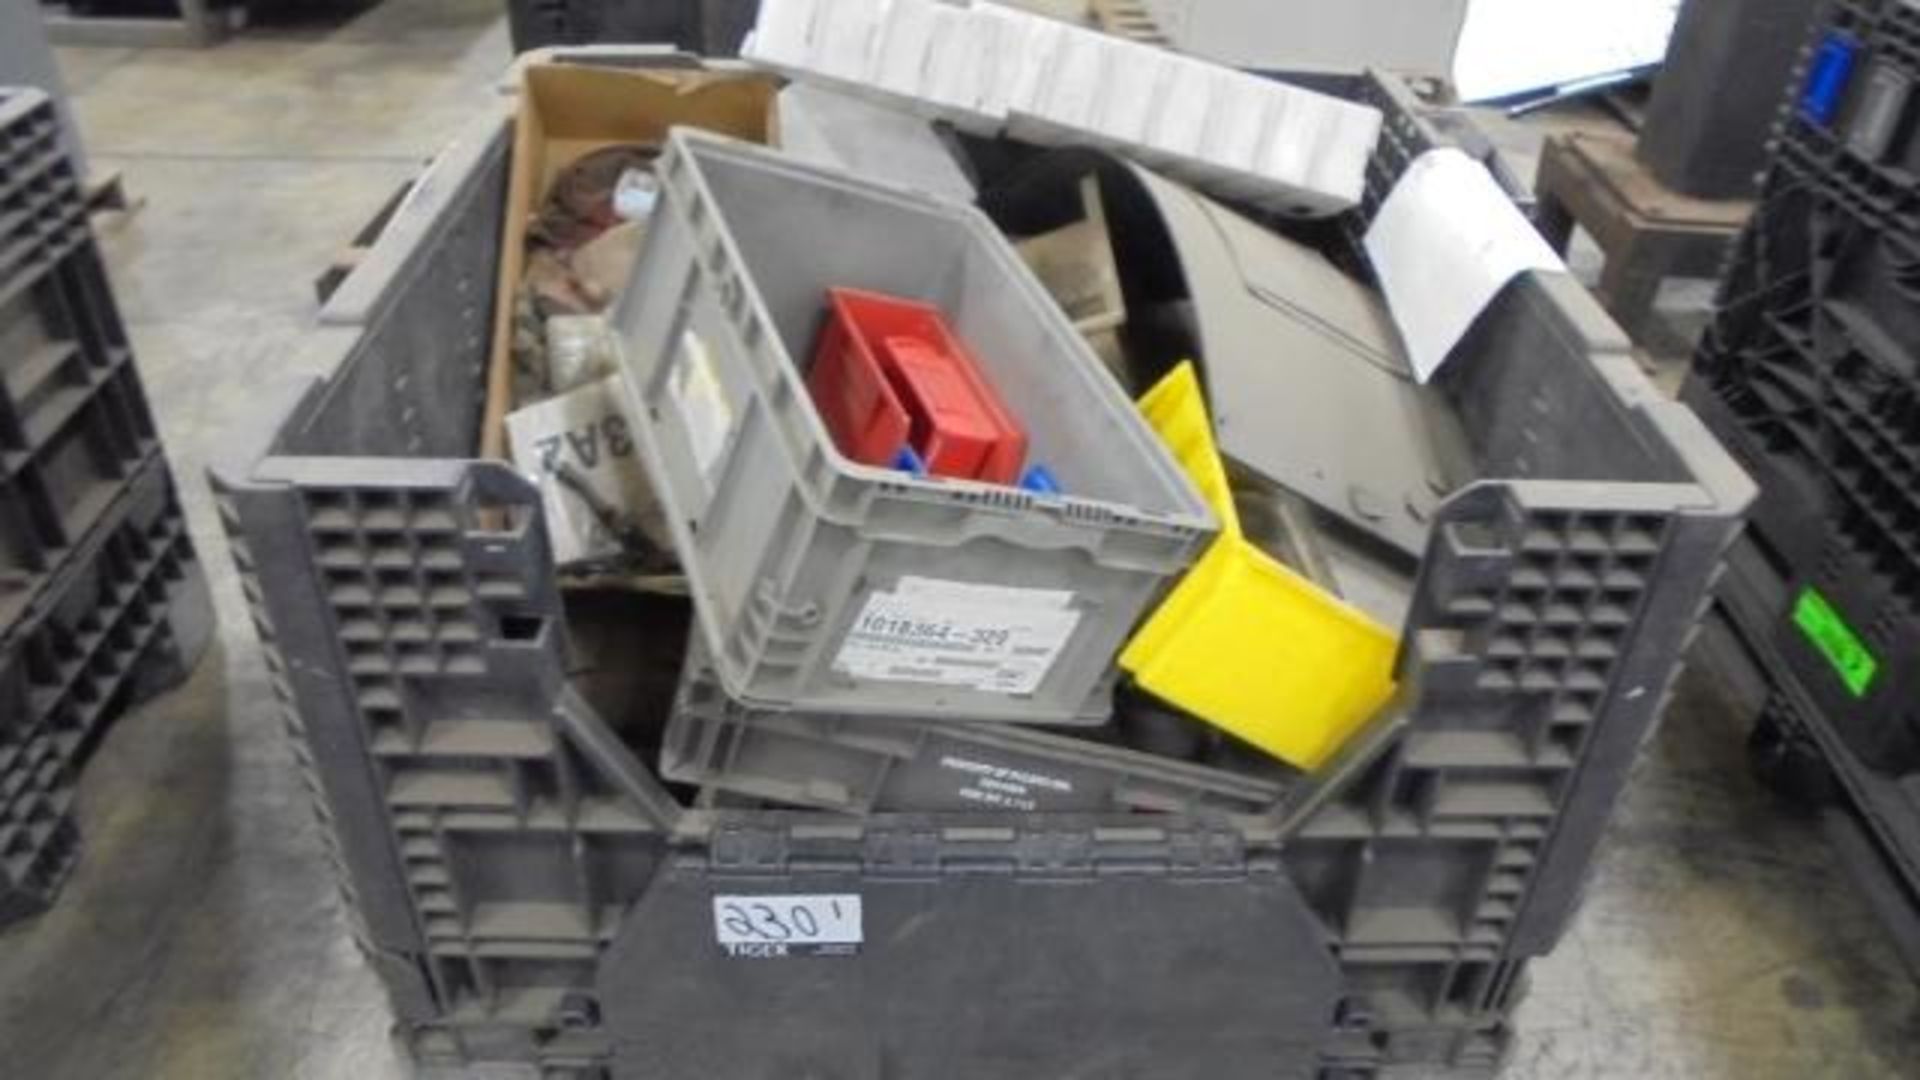 Lot Consisting of (4) Plastic Pallets, Plastic Crates, Weigh Scale, Steel Square Tubing, Cylinder, - Image 4 of 6